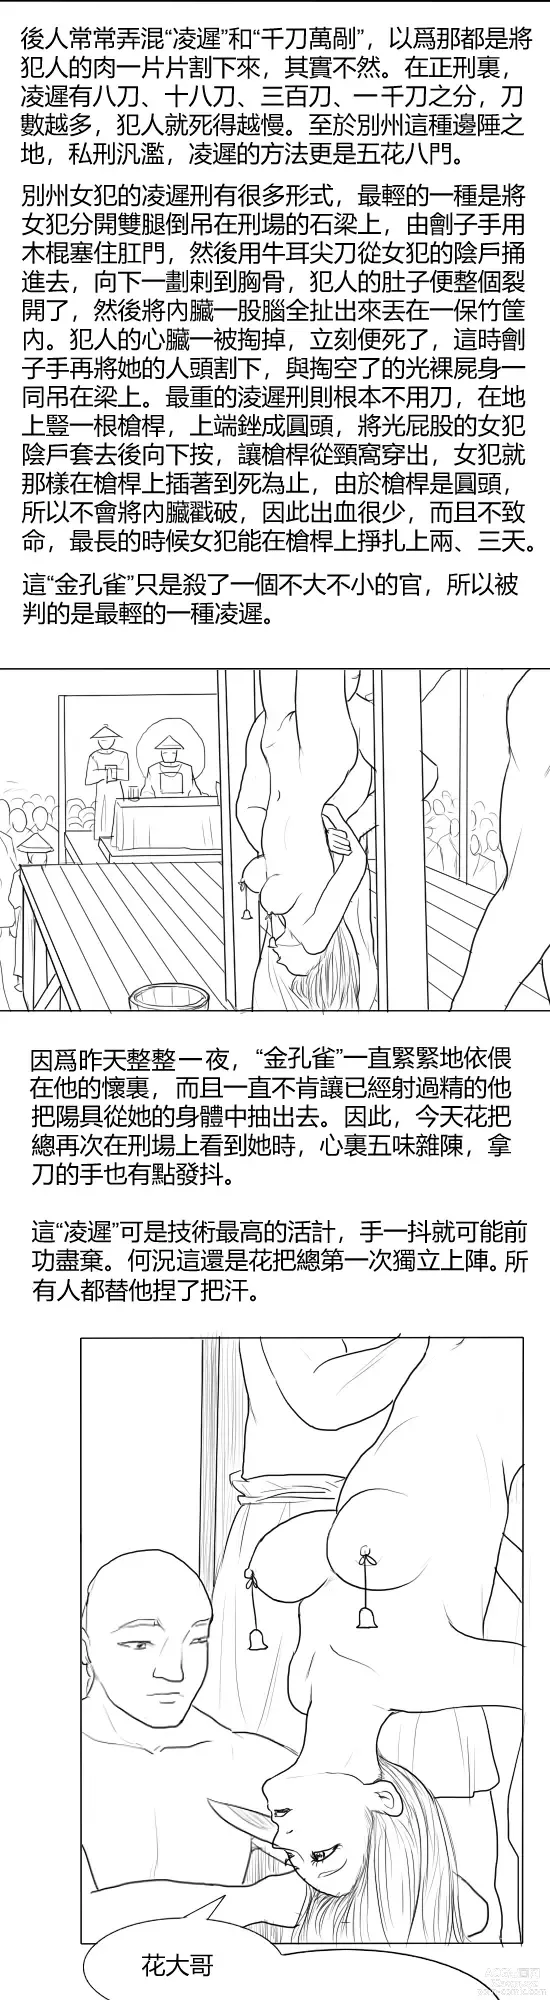 Page 7 of doujinshi 落英  第一话